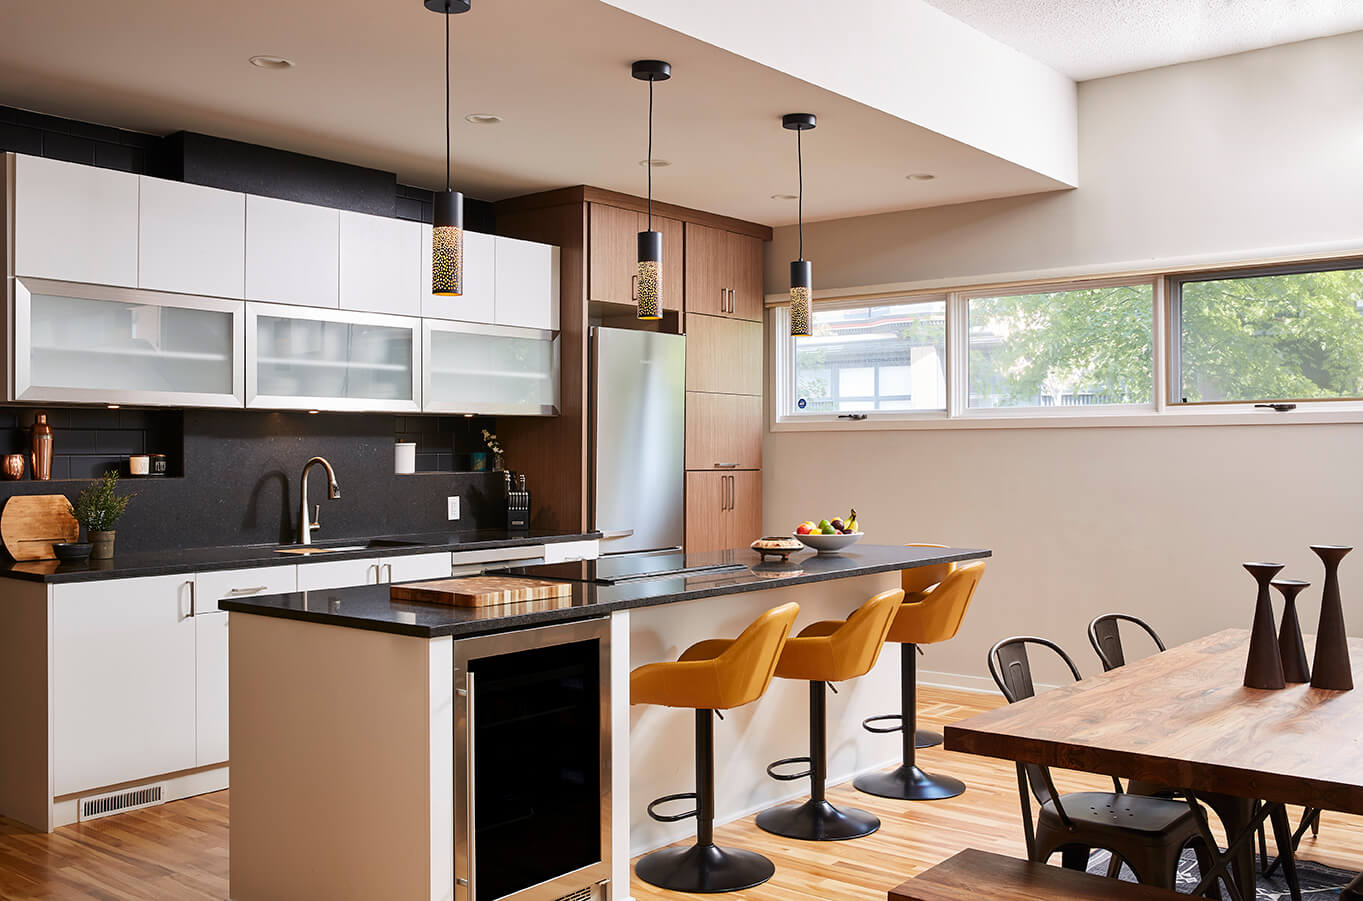 7 Unique Kitchen Considerations You May Not Have Thought About